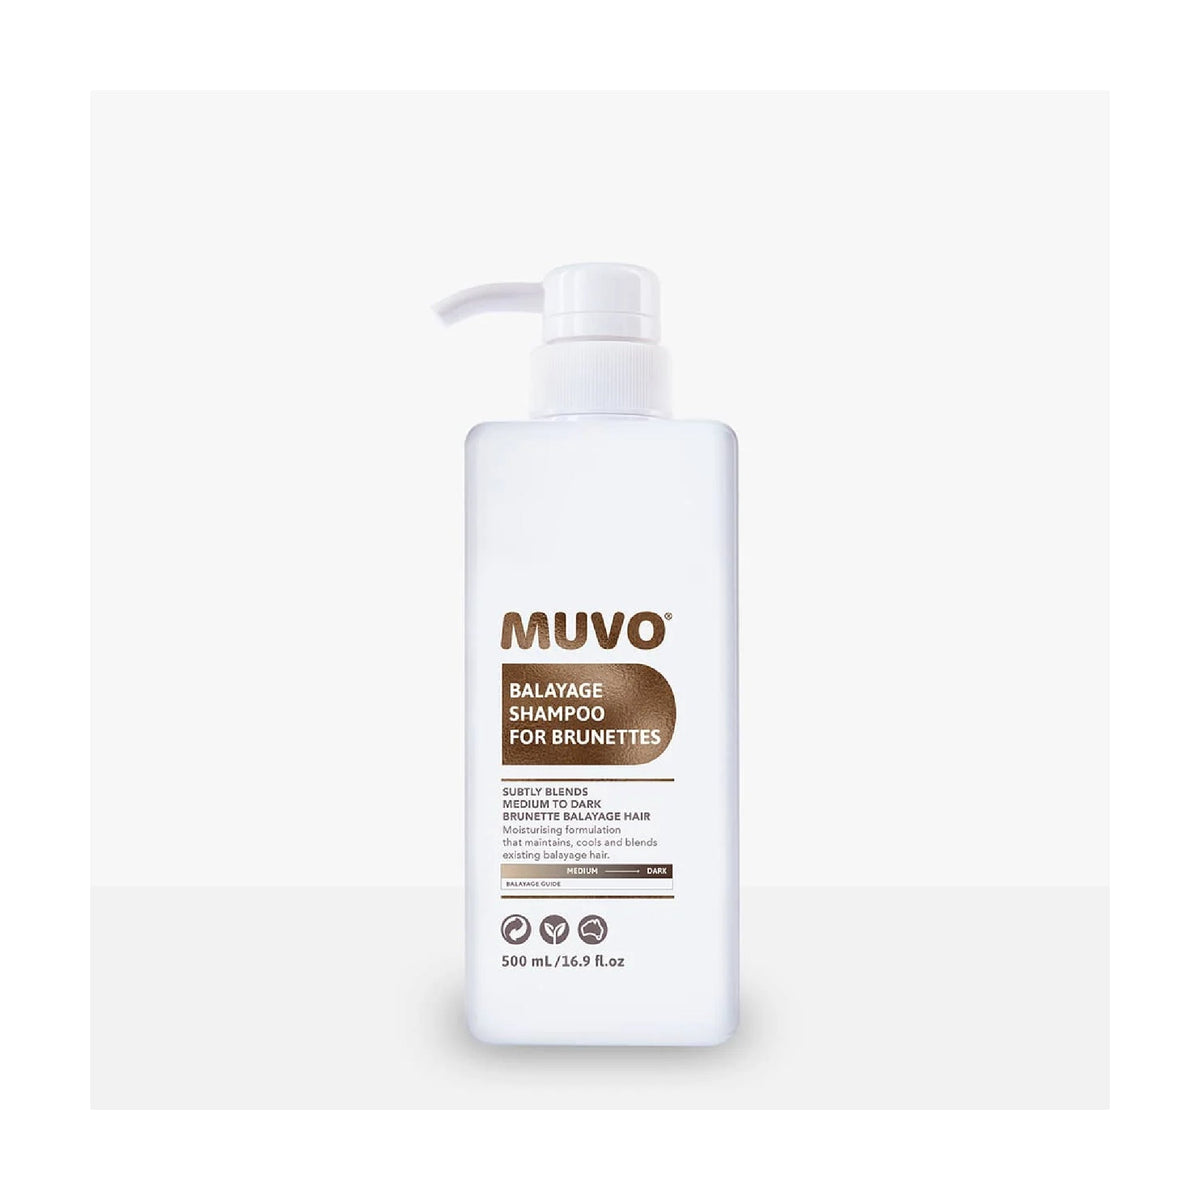 Muvo Balayage Shampoo For Btunettes - Haircare Superstore